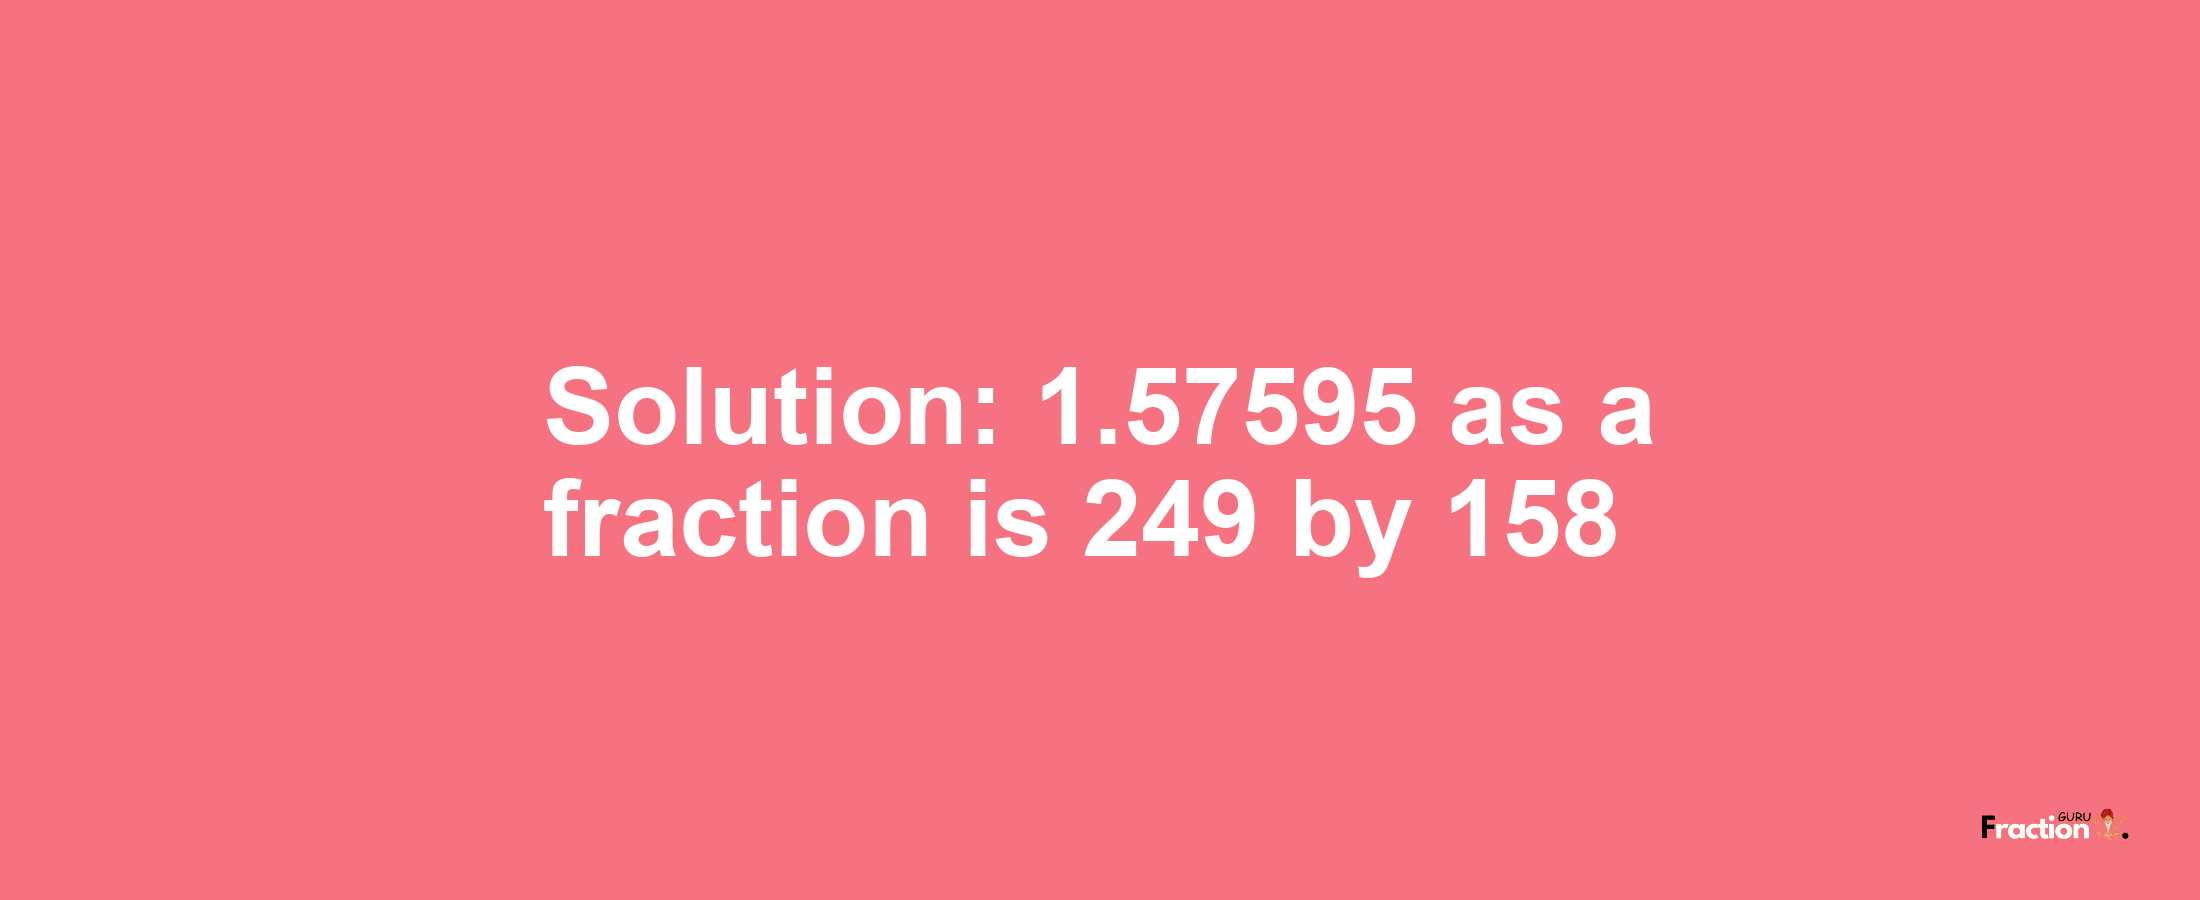 Solution:1.57595 as a fraction is 249/158